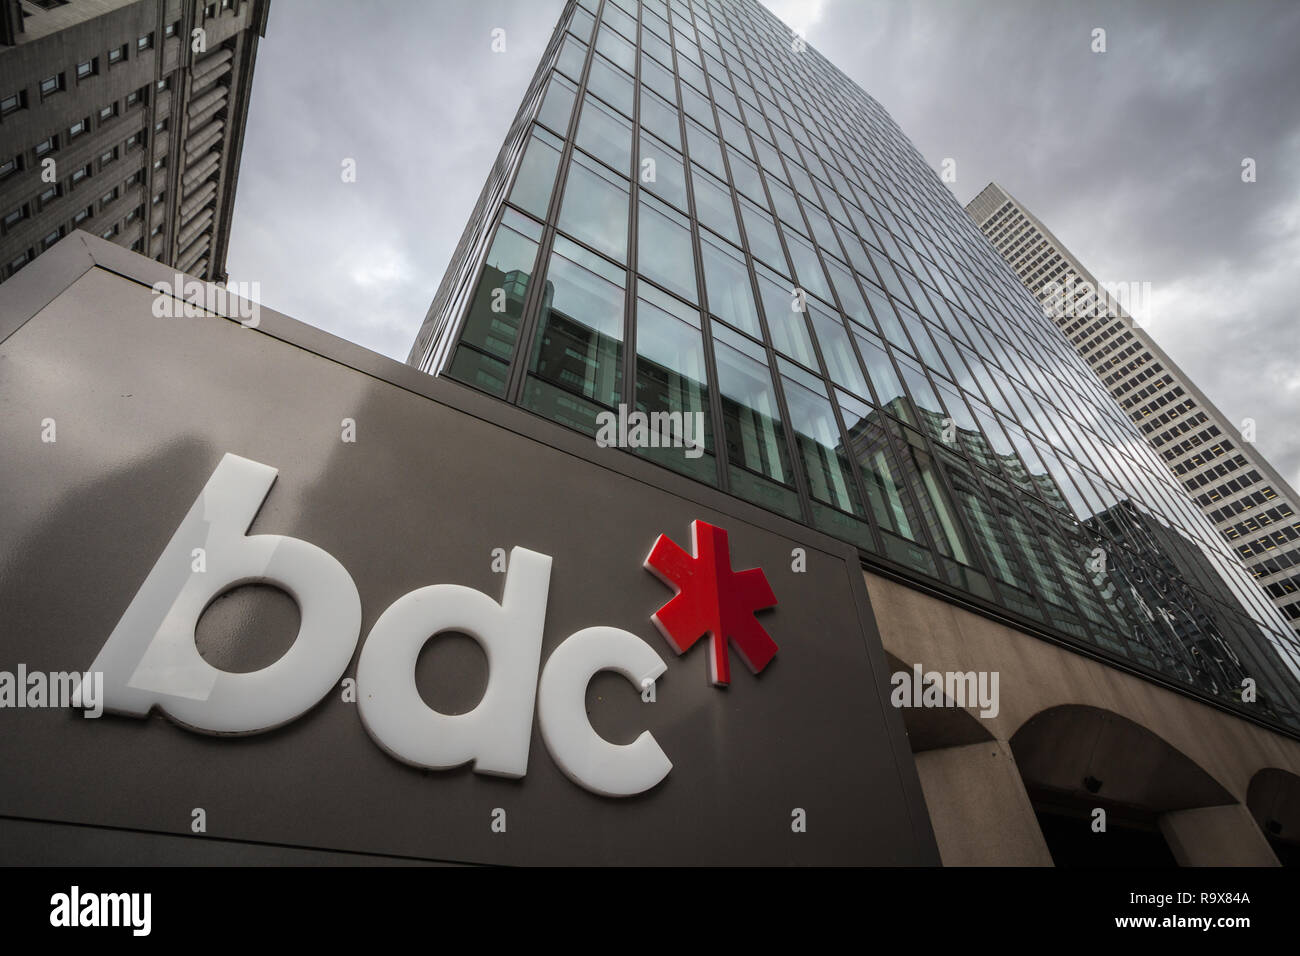 MONTREAL, CANADA - NOVEMBER 7, 2018: BDC Bank logo on their headquarters for Montreal, Quebec. the Business Development Bank of Canada is a bank fundi Stock Photo